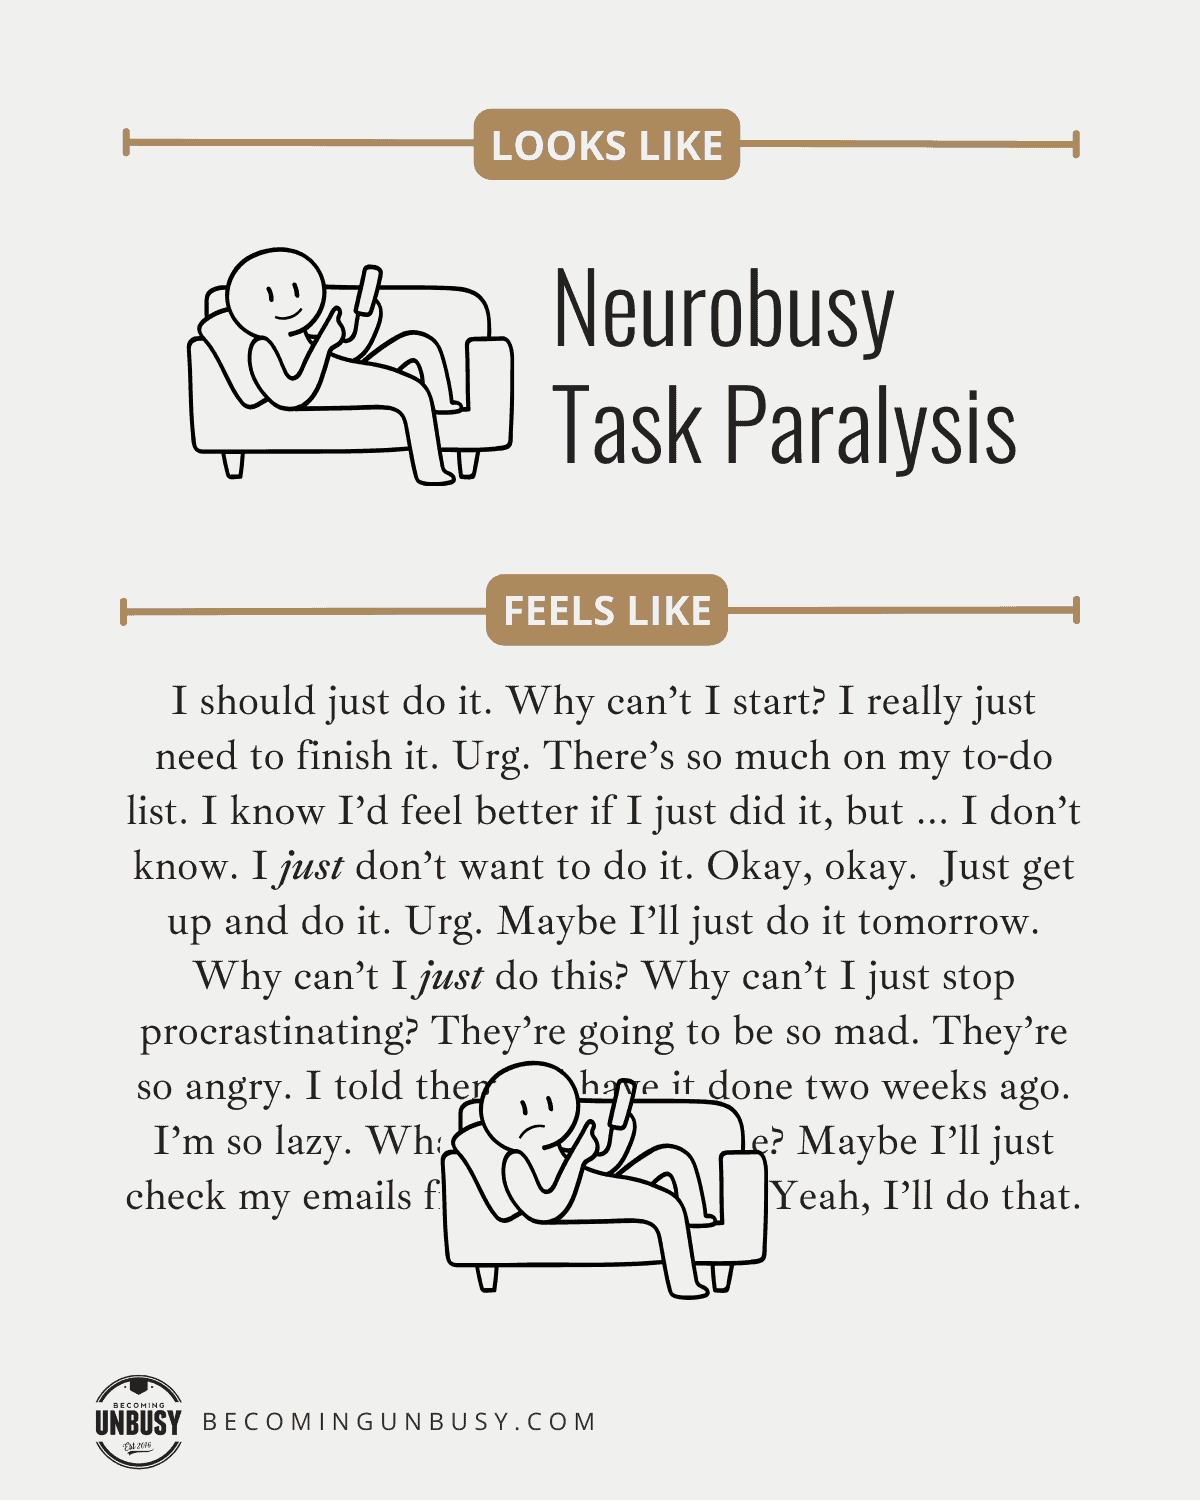 A graphic showing what task paralysis "looks like" (showcasing a person smiling on a couch scrolling on a phone) verses what it "feels like" (showcasing a sad person on a phone with a thought stream of self-doubt and negative self talk).